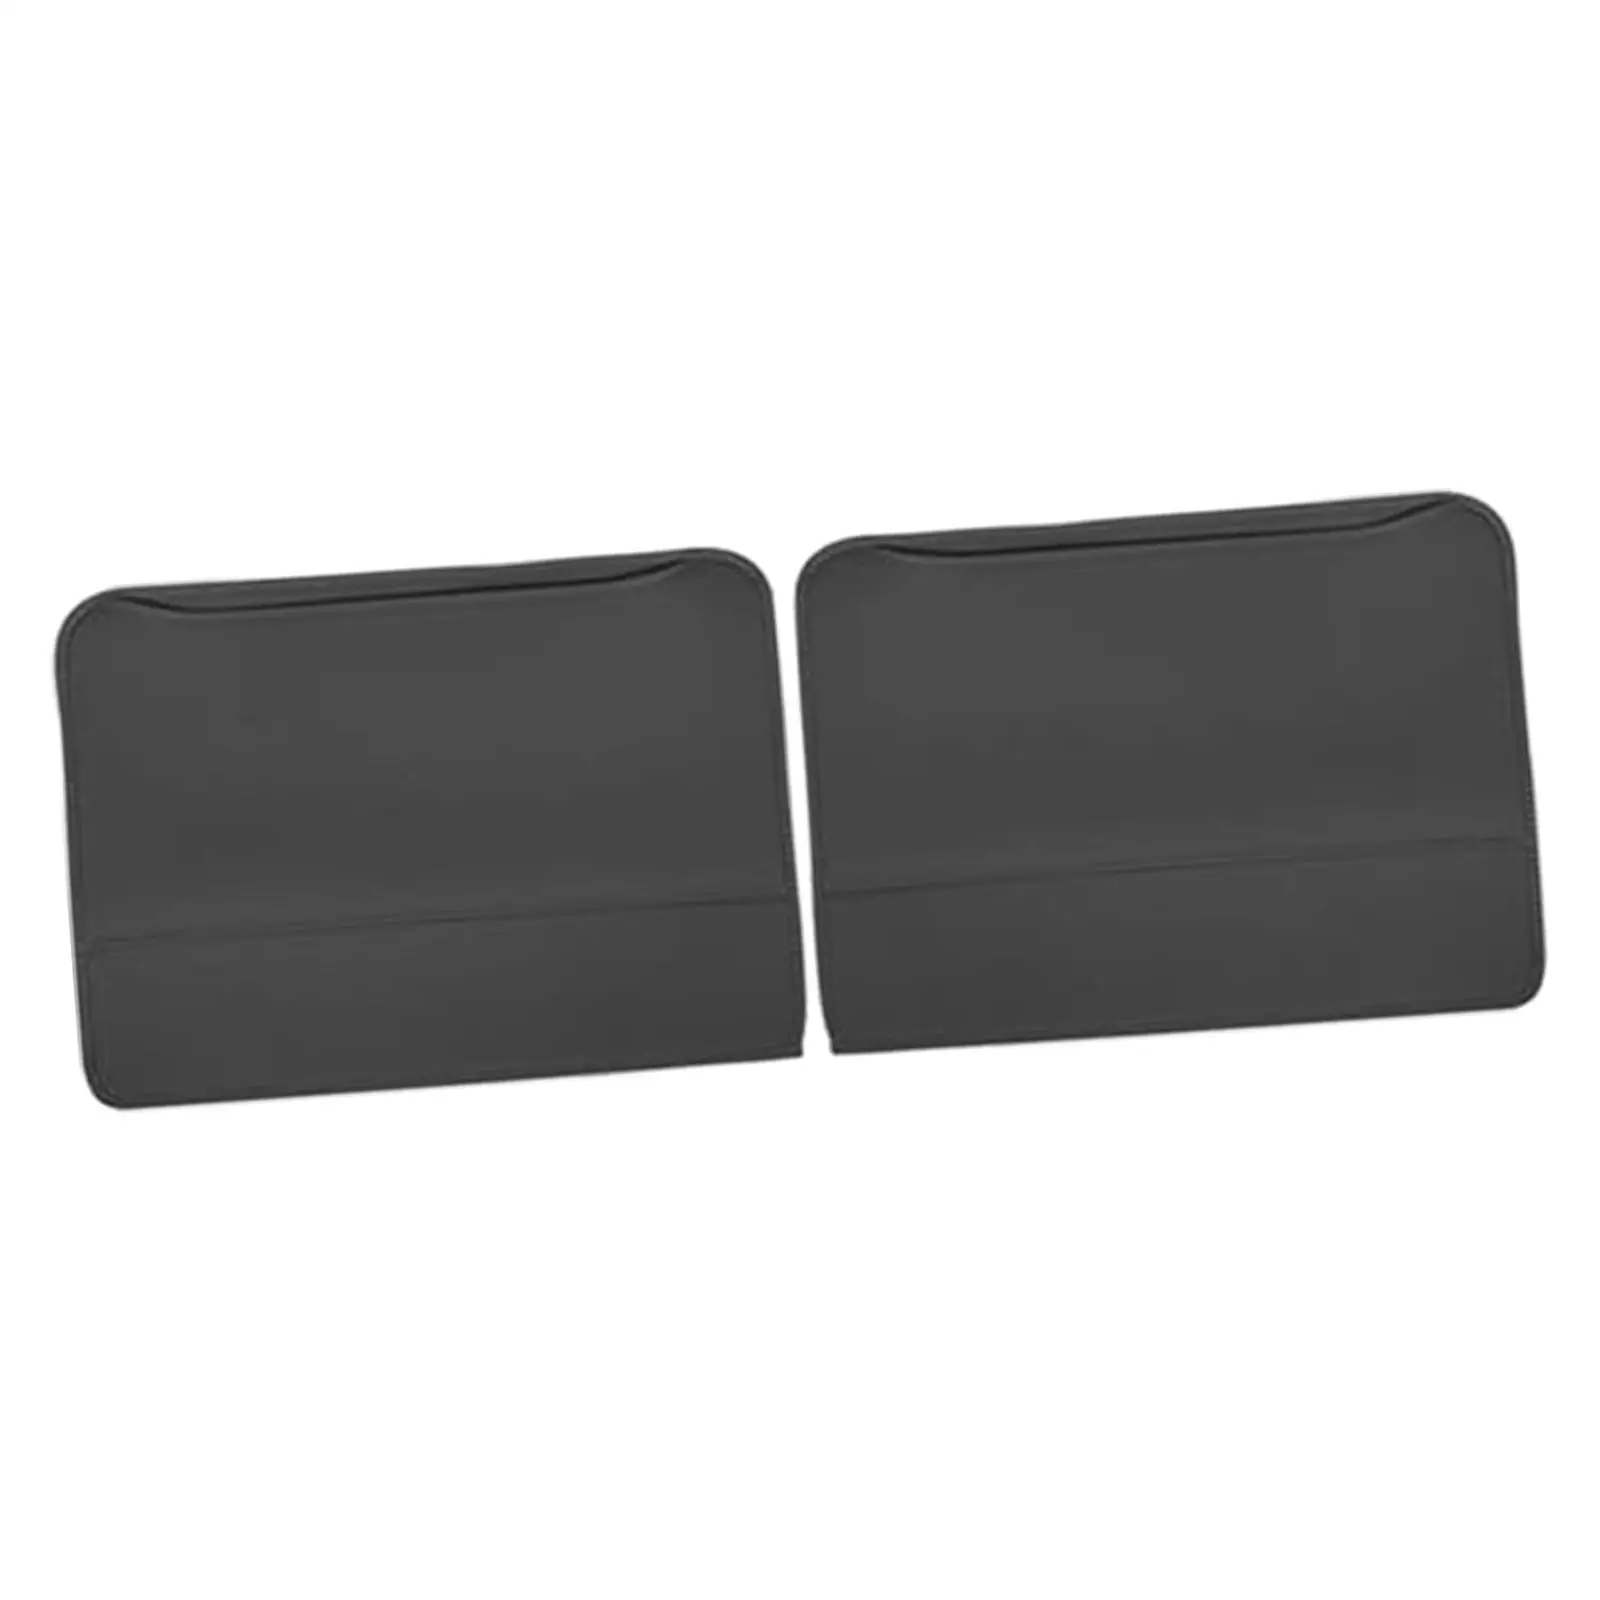 2x Seat Back Kick Mats Keep Clean and Neat with Storage Bag Prevent Dust and Trampling Car Back Seat Pad Cover for Byd Seal